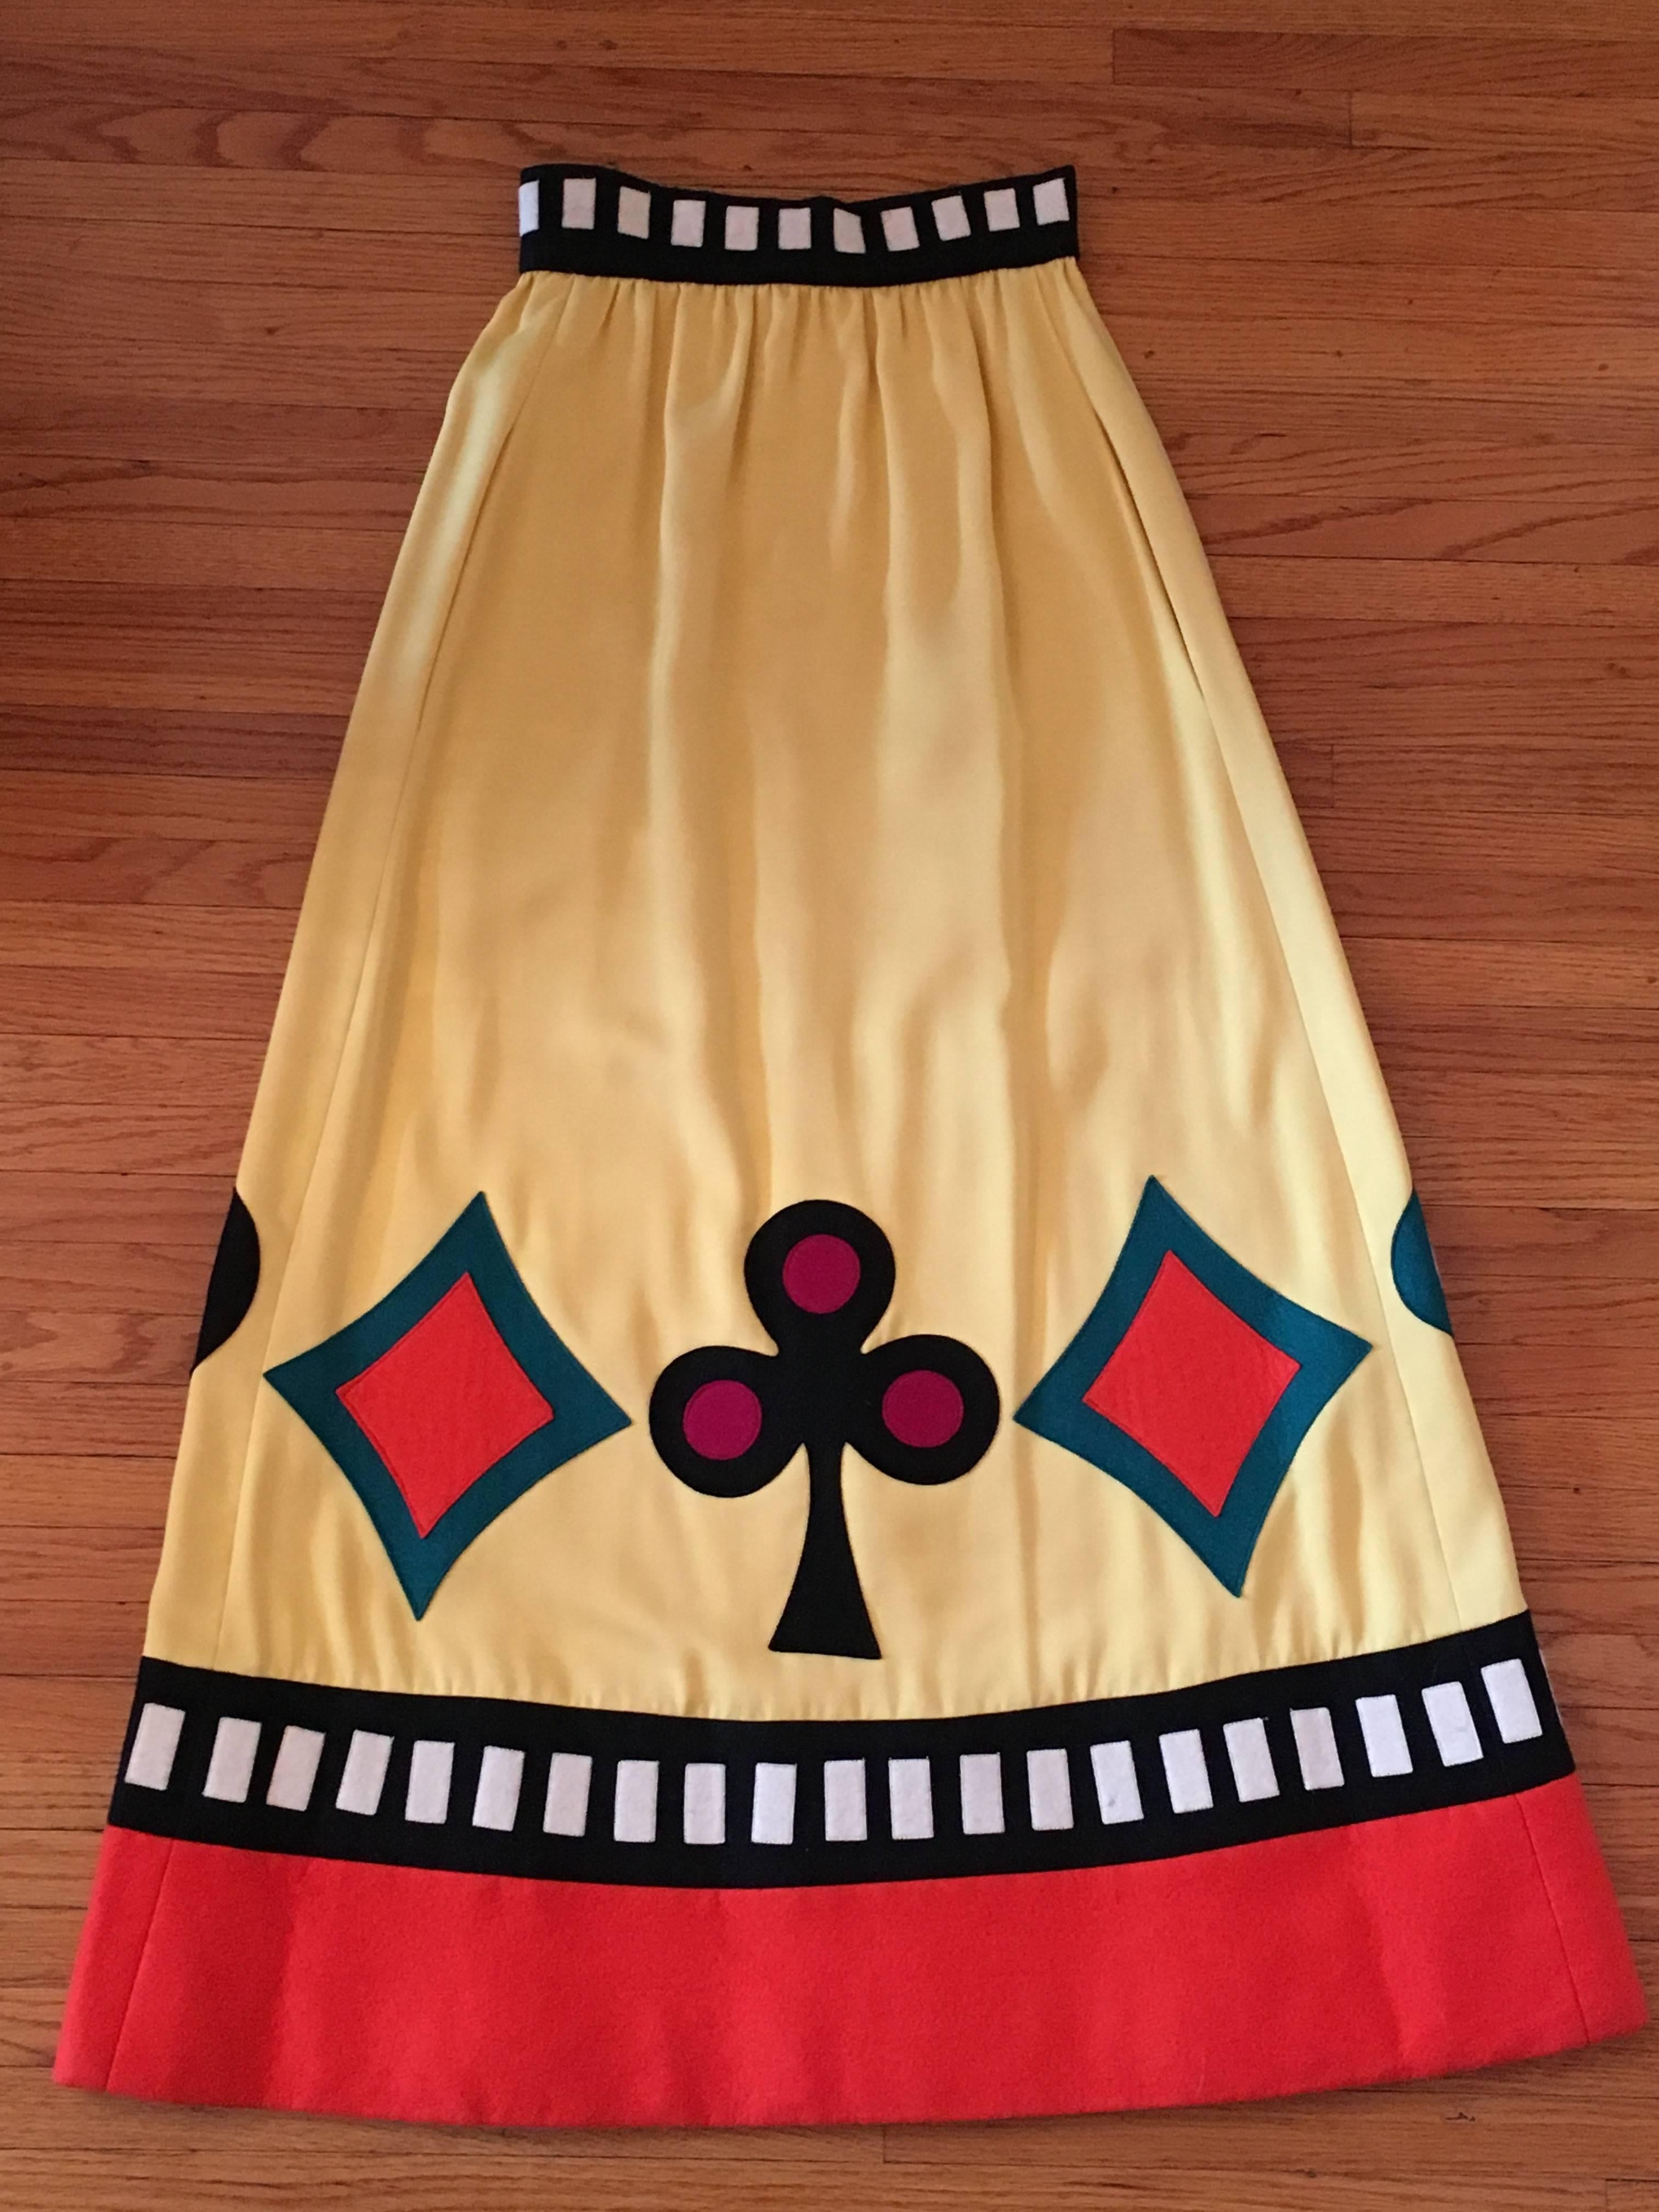 Youssef Rizkallah designed this amazing skirt for Malcolm Starr in the 1970s. He designed for Malcolm Starr from 1969 - 1975. The skirt is a long yellow sateen maxi skirt that zips up the back. The waistband is trimmed with with black and white felt